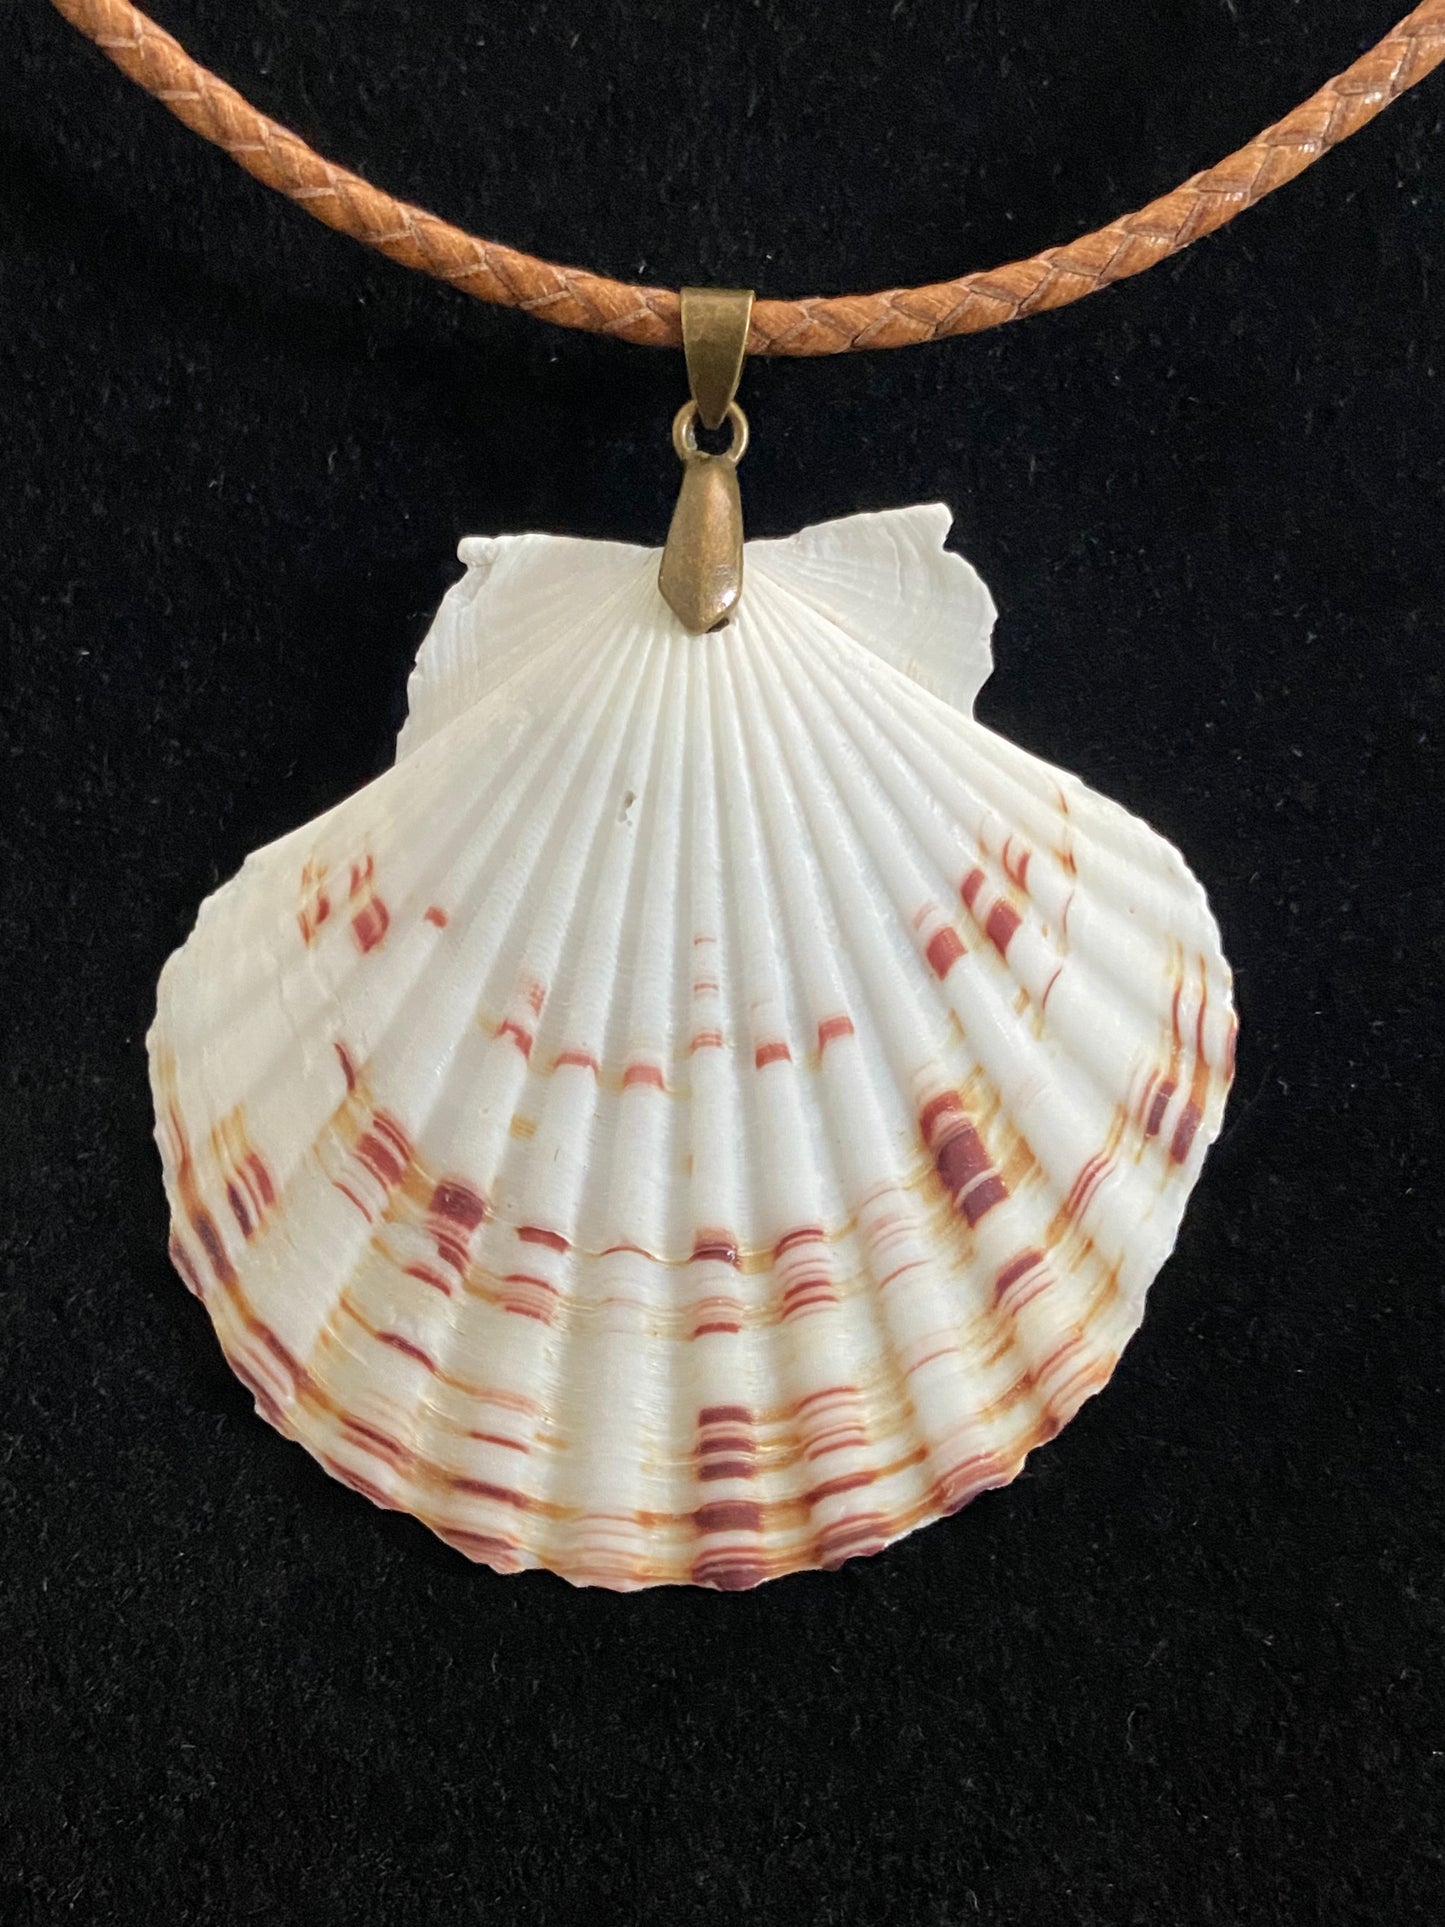 White, Maroon & Tan Seashell with Light Brown Leather Cord Necklace 2